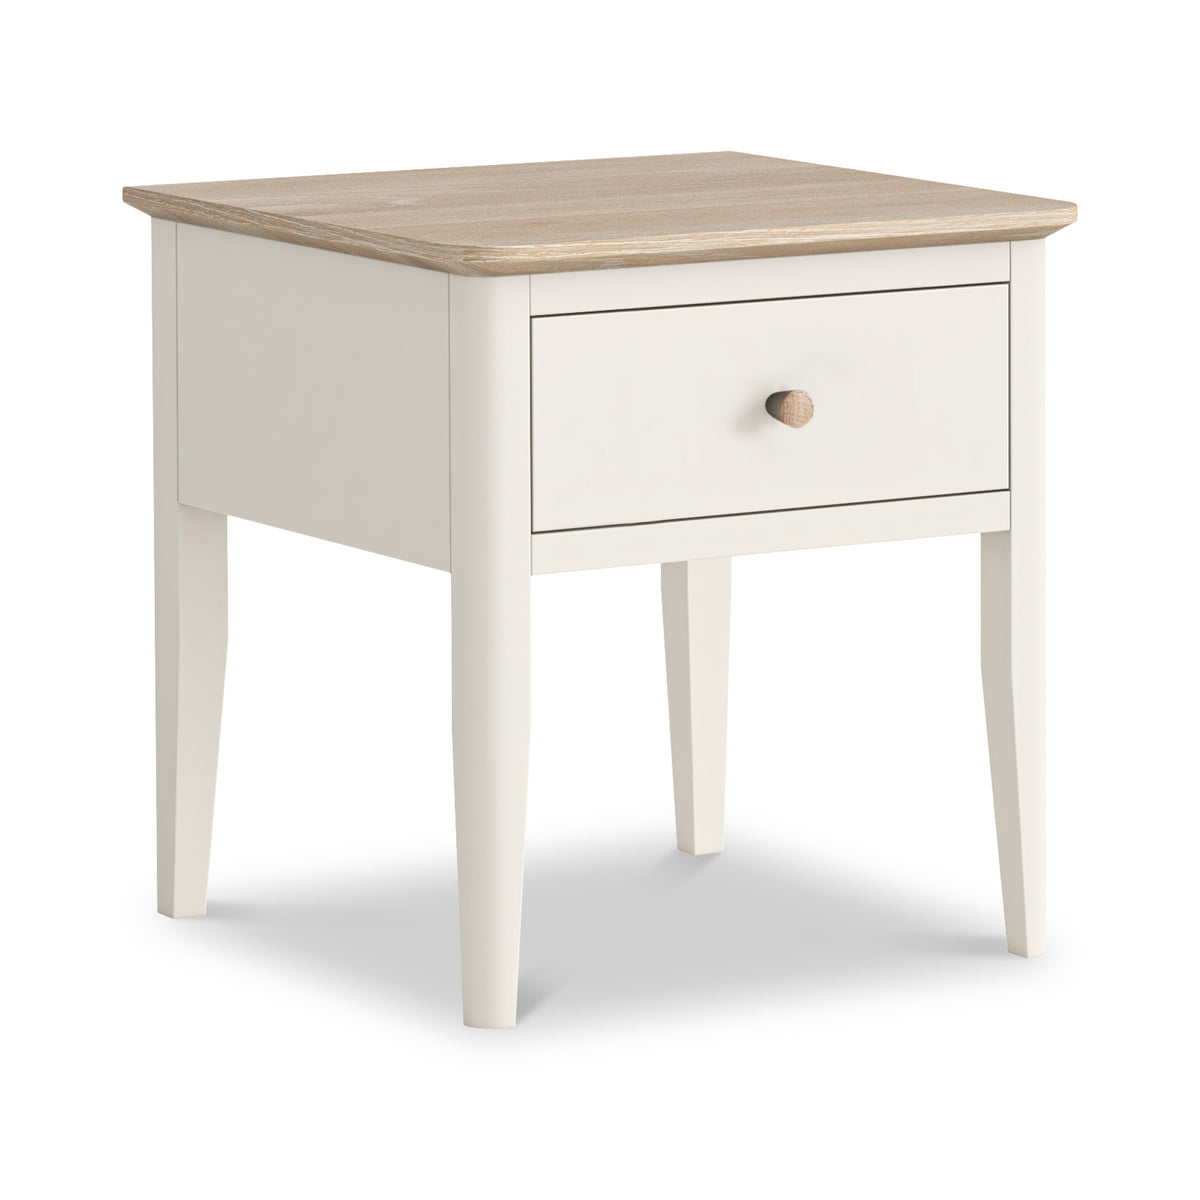 Penrose Coconut White Lamp Table with wooden handle from Roseland Furniture